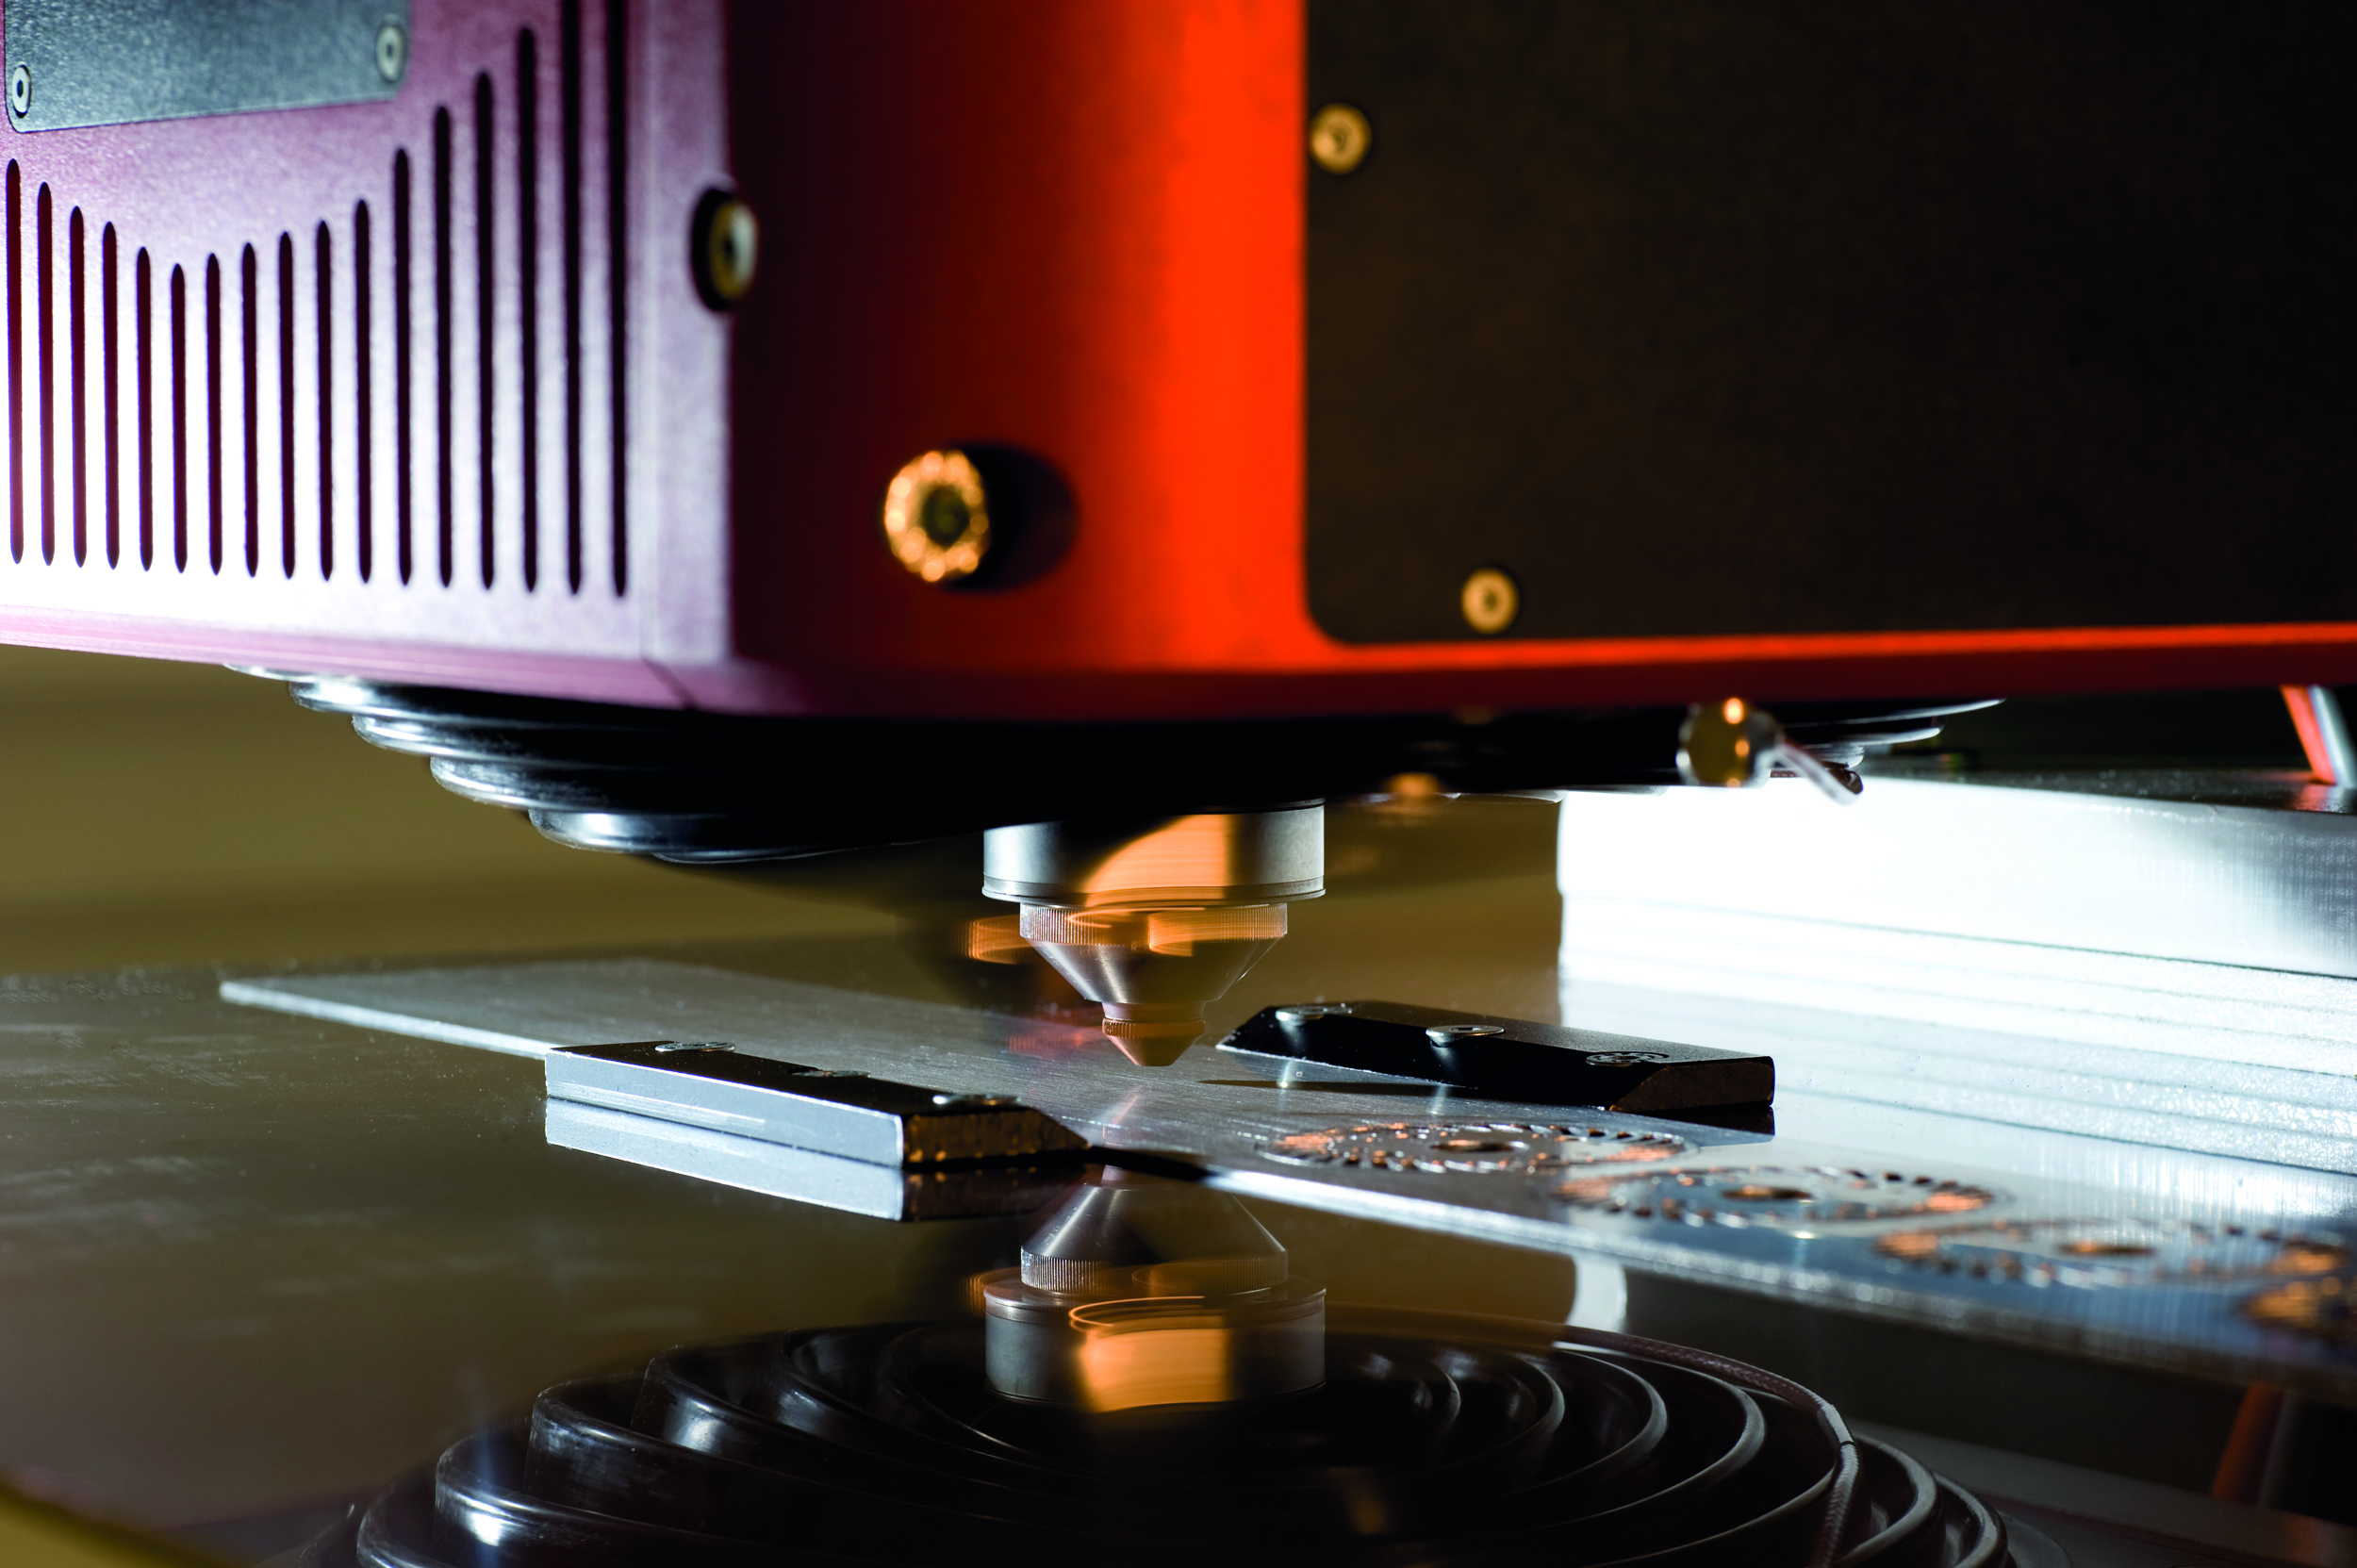 Highly dynamic laser material processing with the HDFC6060 form cutter.